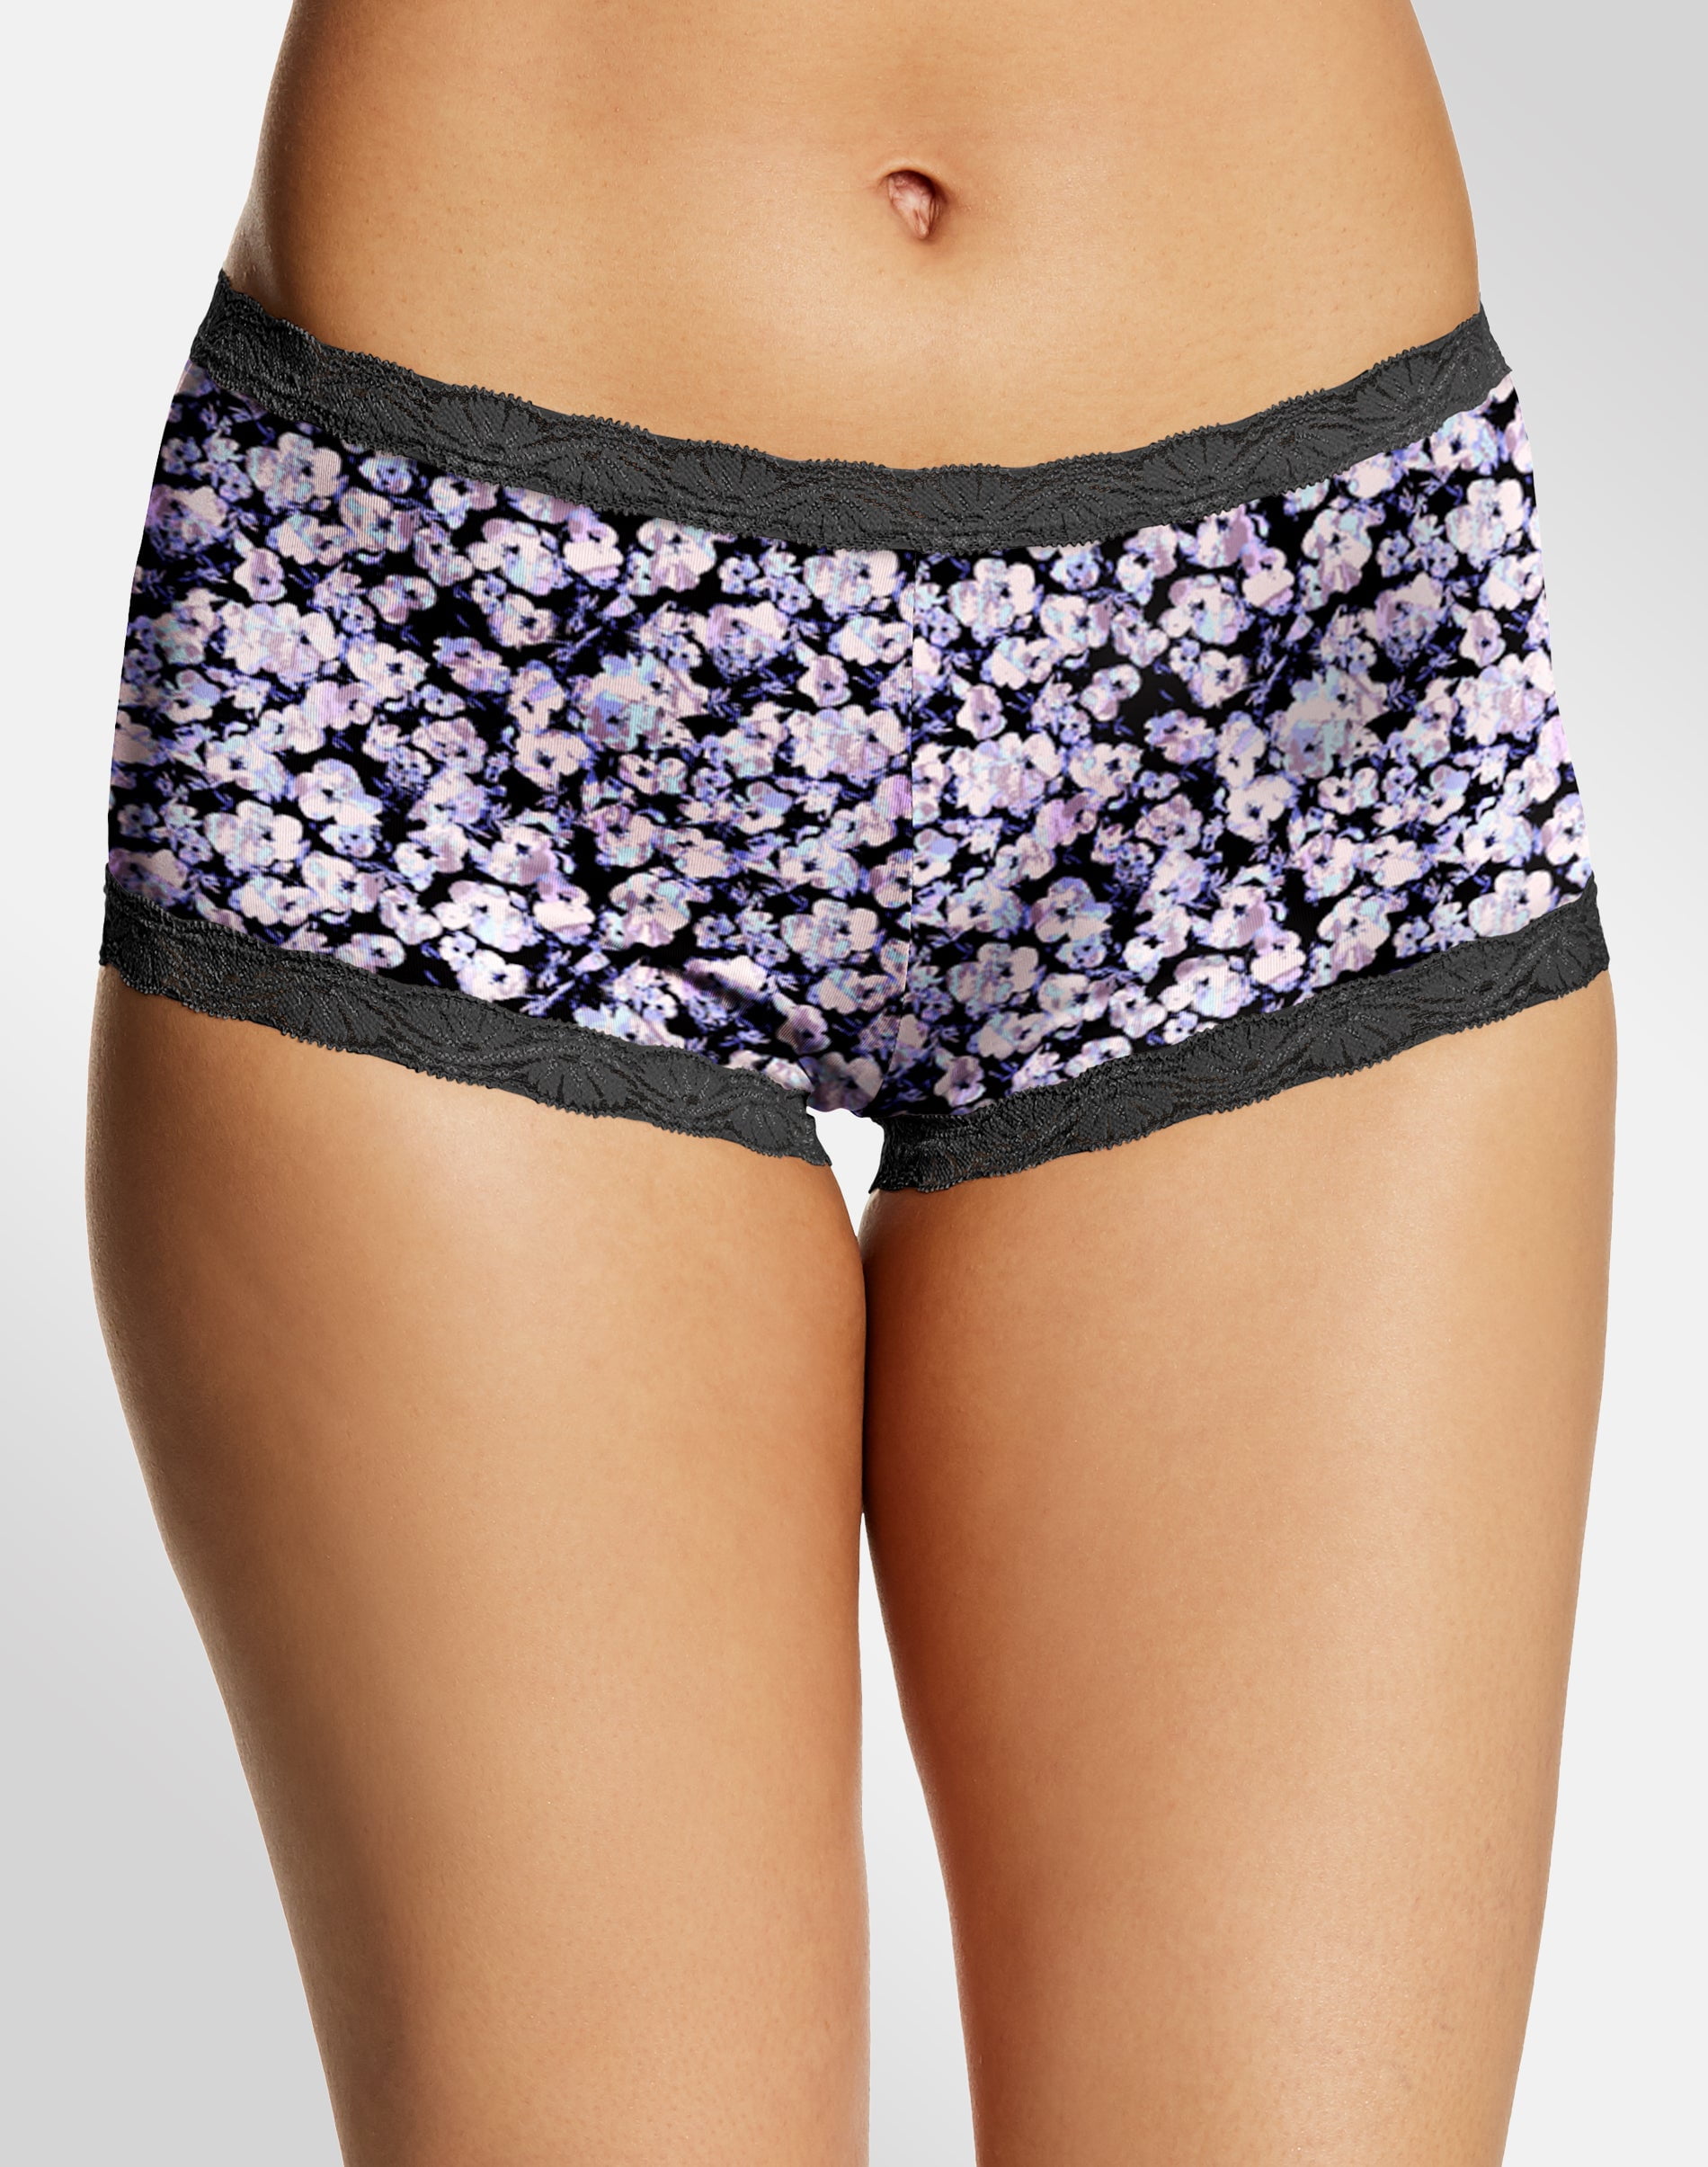 Maidenform One Fab Fit Microfiber Boyshort Underwear With Lace Blue Pearl Floral  9 